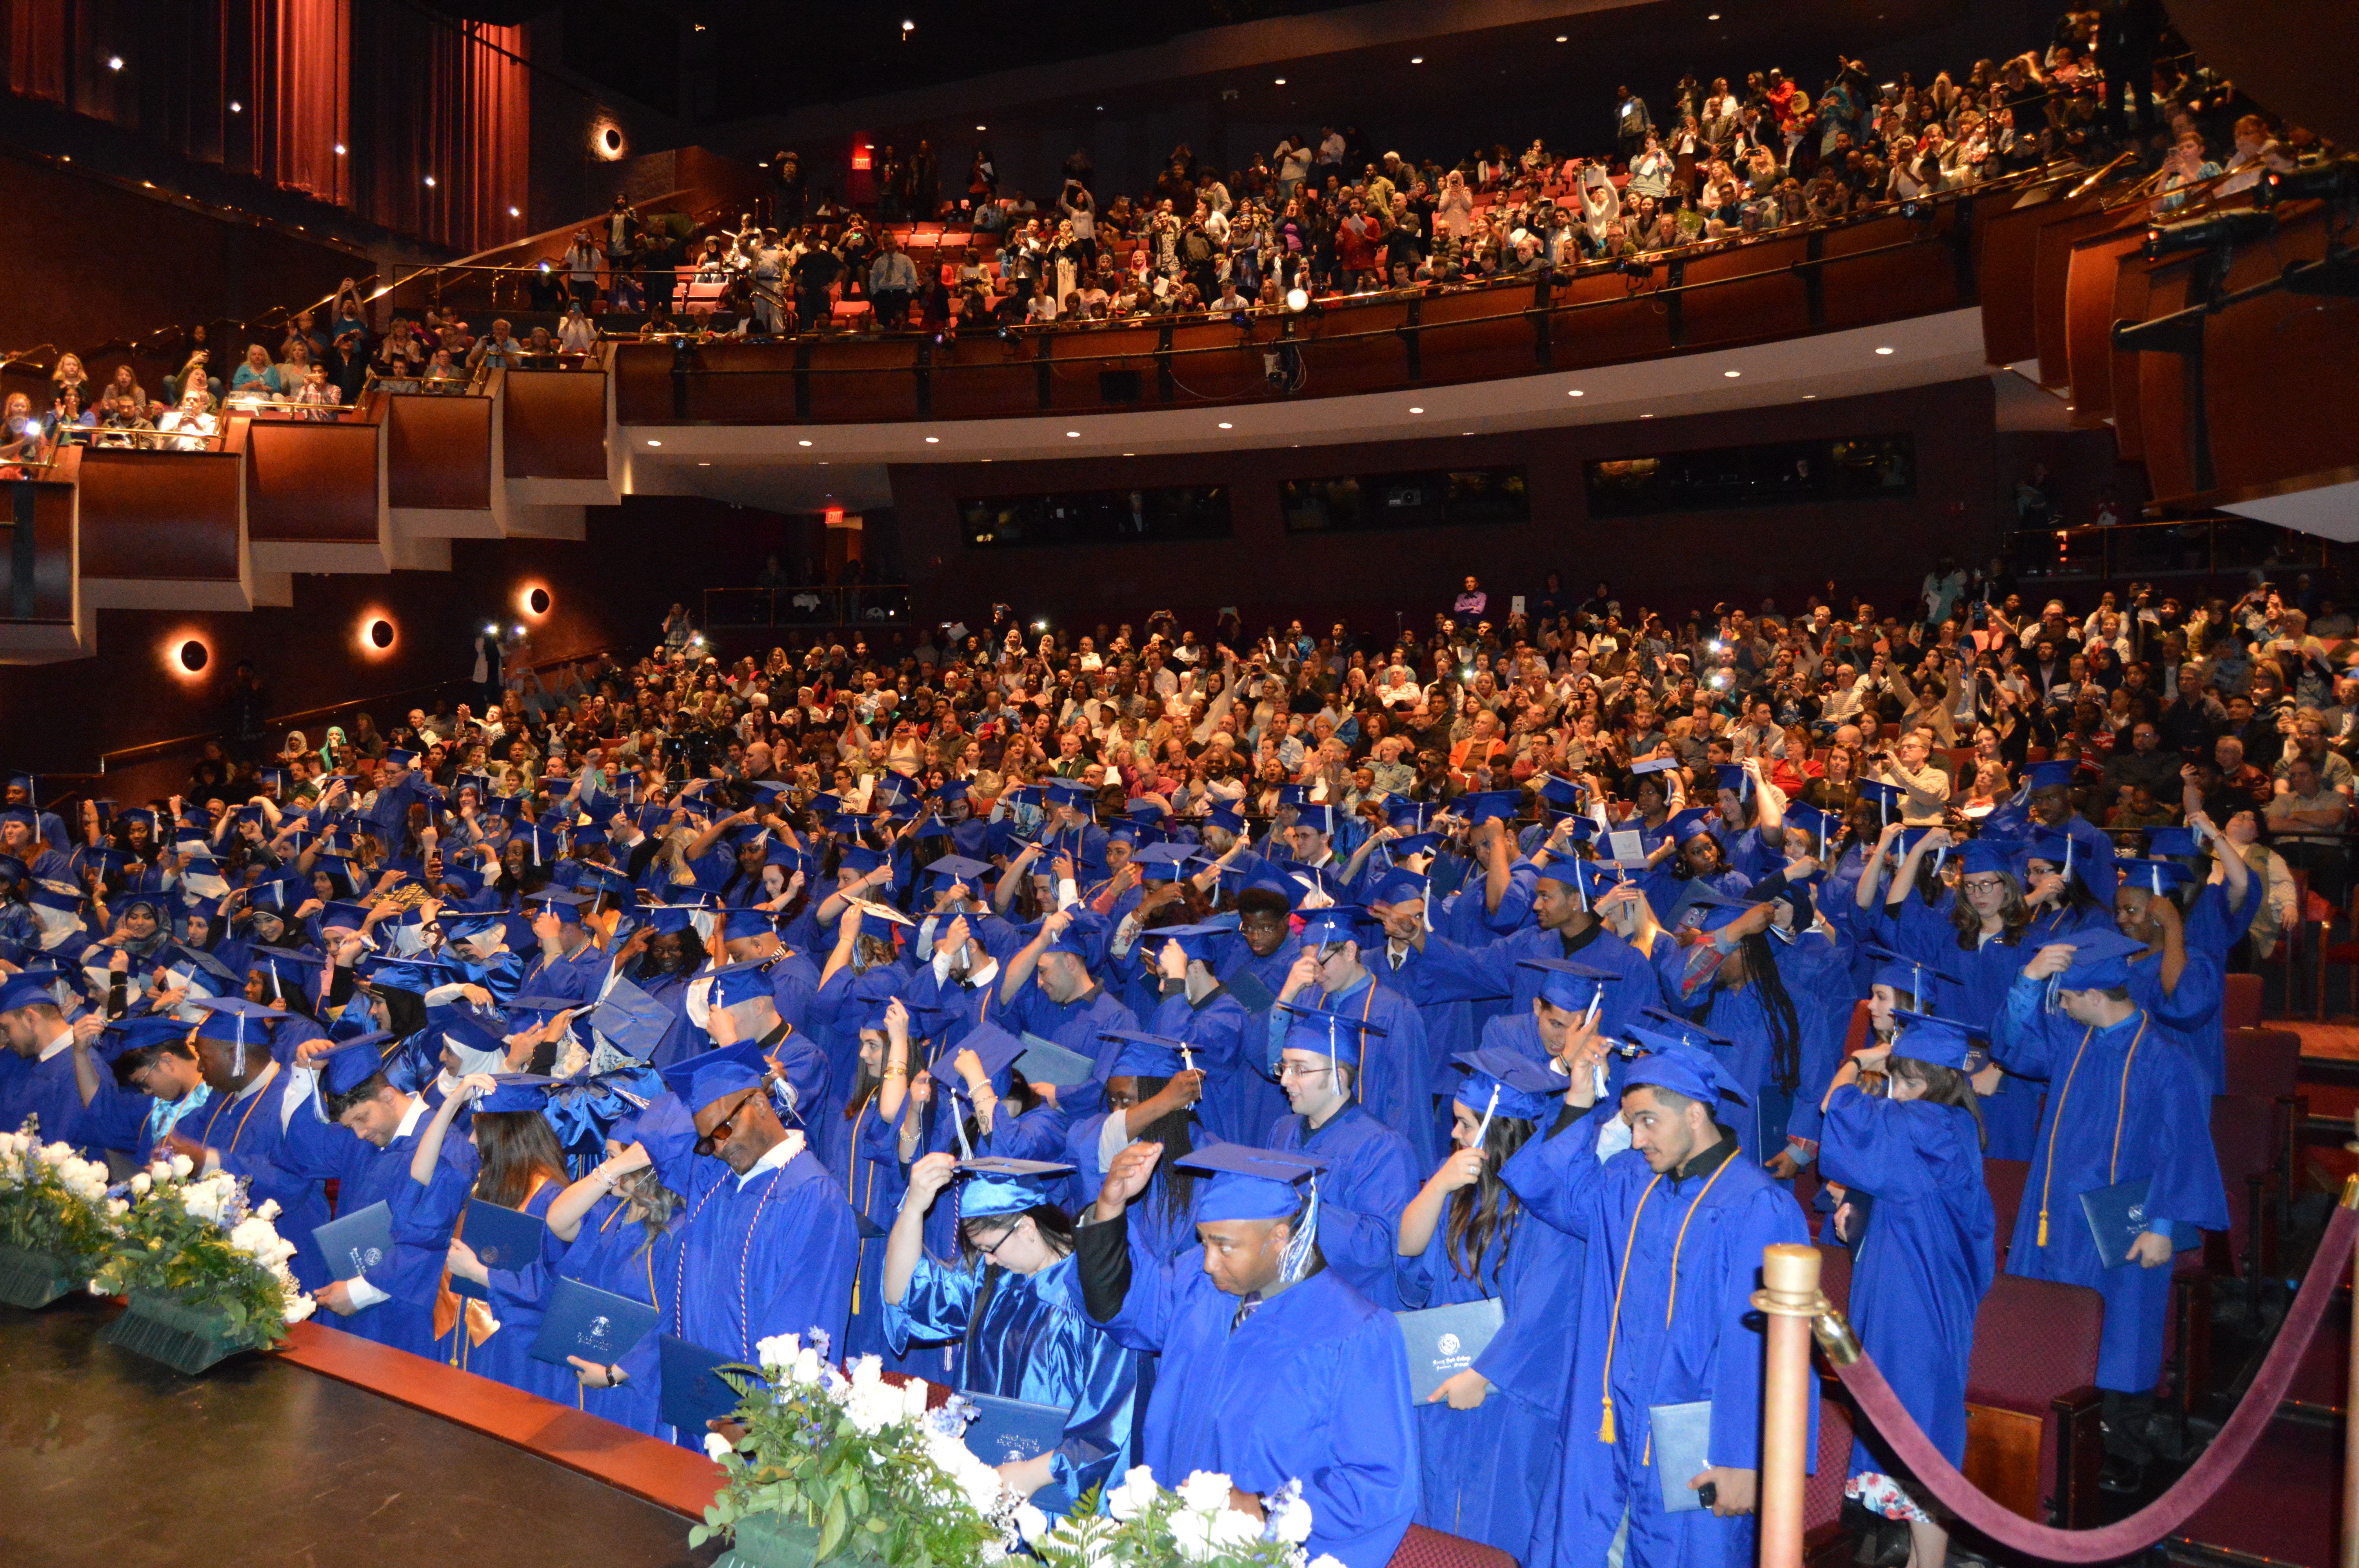 Hundreds of students wearing blue graduation gowns and caps stand in a theatre with their families near the back and on the balcony of the theatre applauding as the students move their tassels.